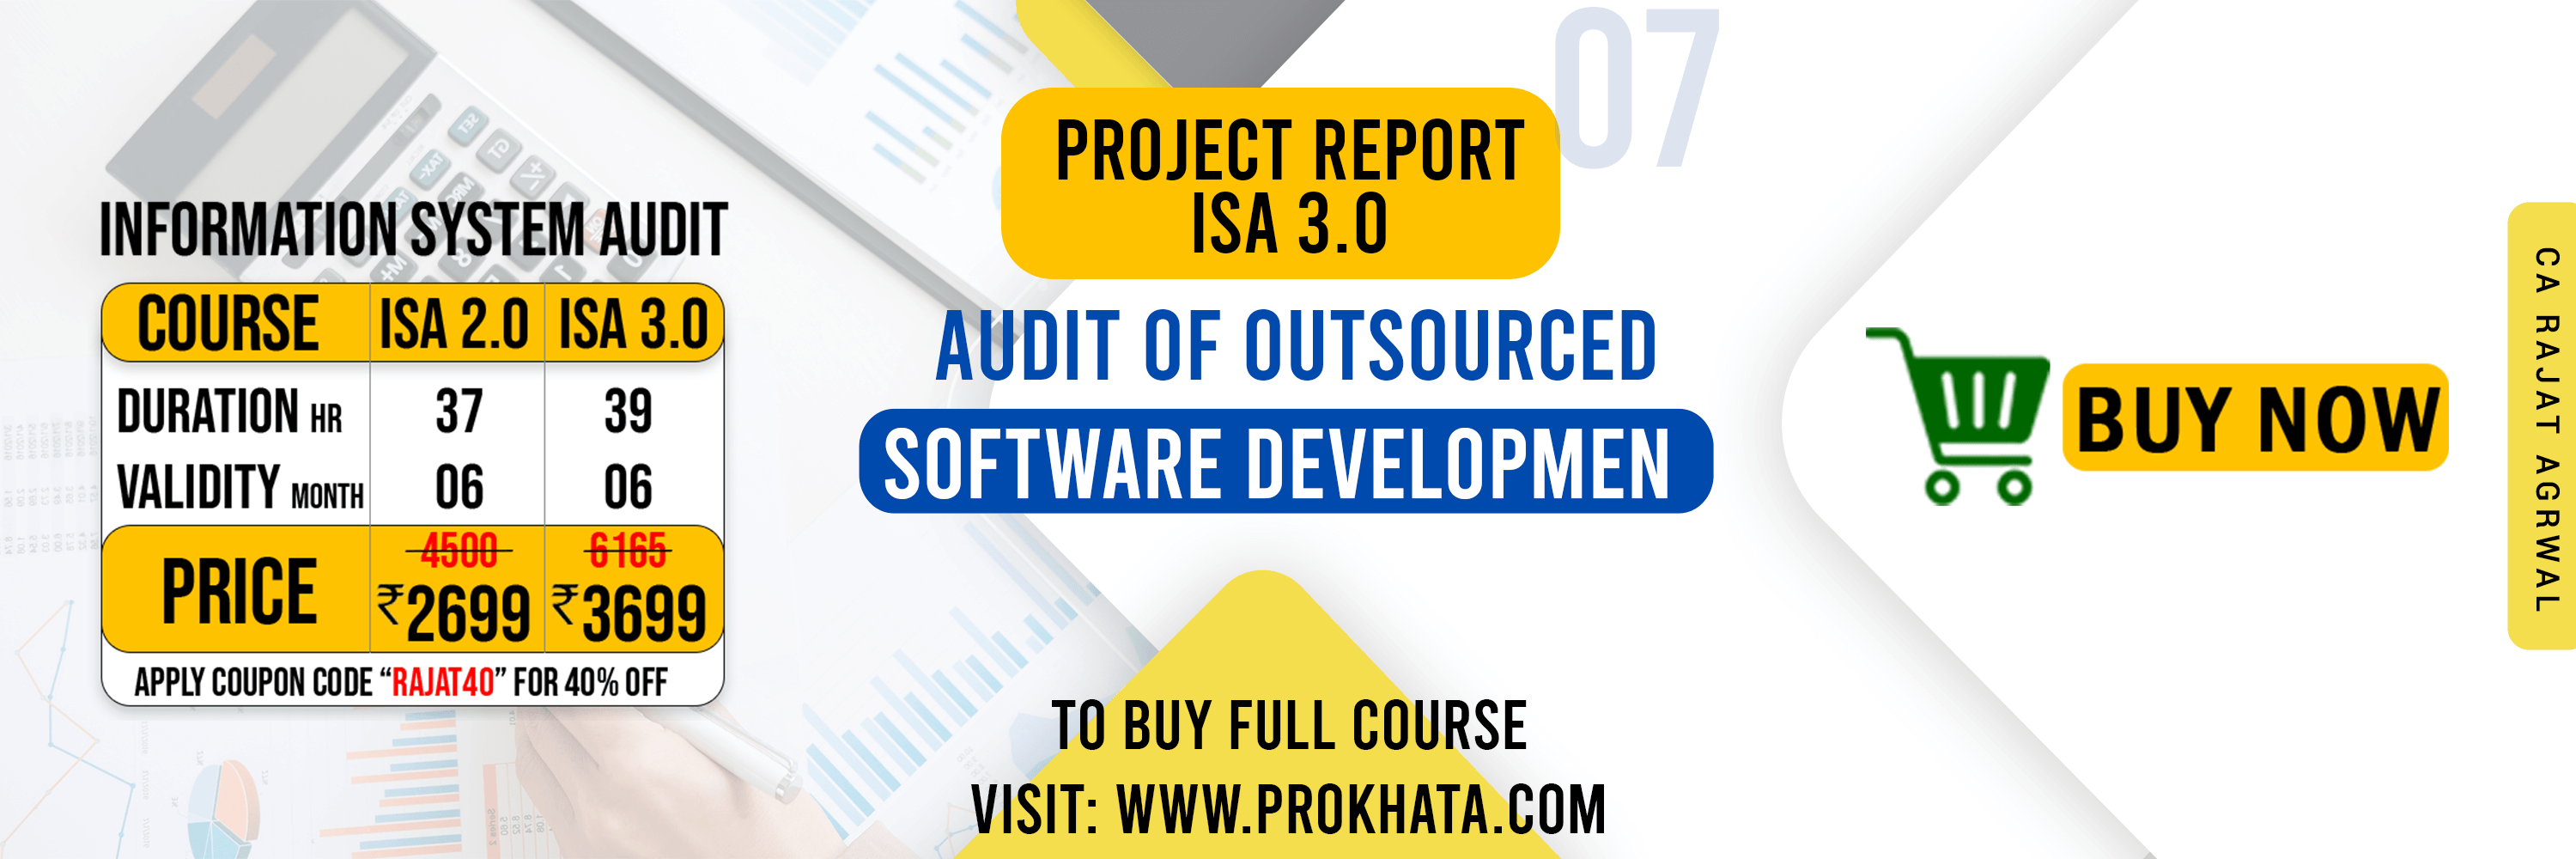 Project Report 07 Audit of Outsourced Software Development